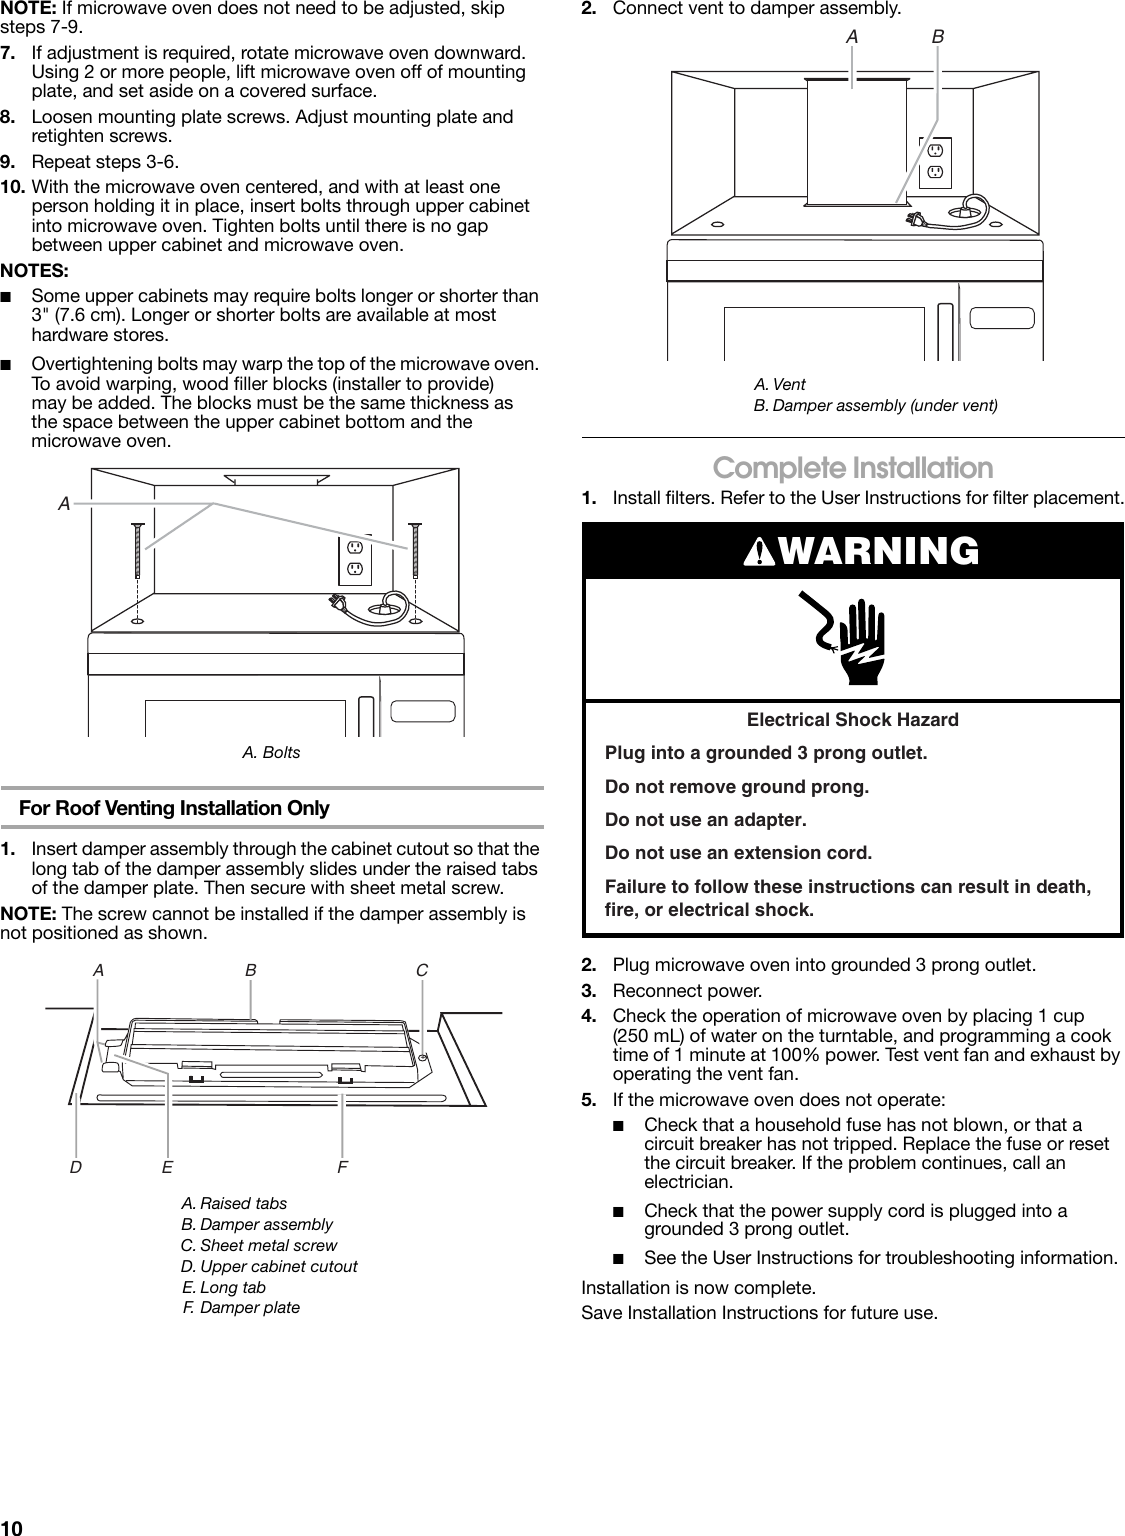 Page 10 of 12 - Whirlpool Whirlpool-W10238252A-Users-Manual- W10238252A  Whirlpool-w10238252a-users-manual